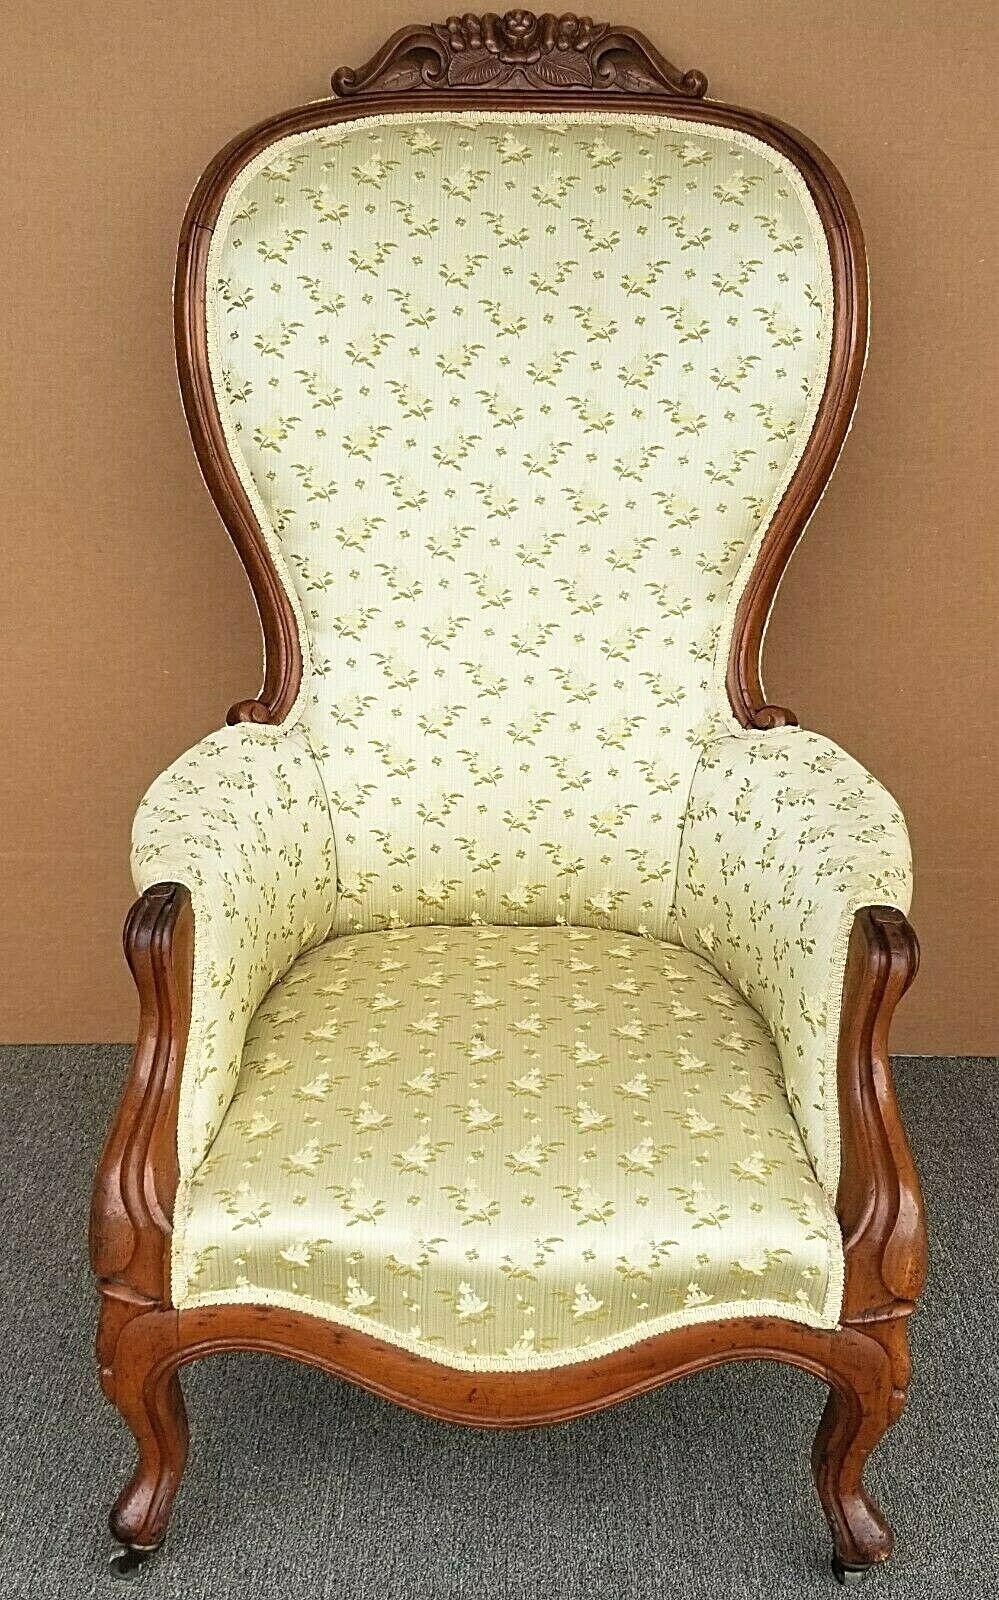 For FULL item description be sure to click on CONTINUE READING at the bottom of this listing.

Antique 1800's Victorian Balloon Back Parlor Carved Walnut Armchair

Approximate Measurements in Inches
47